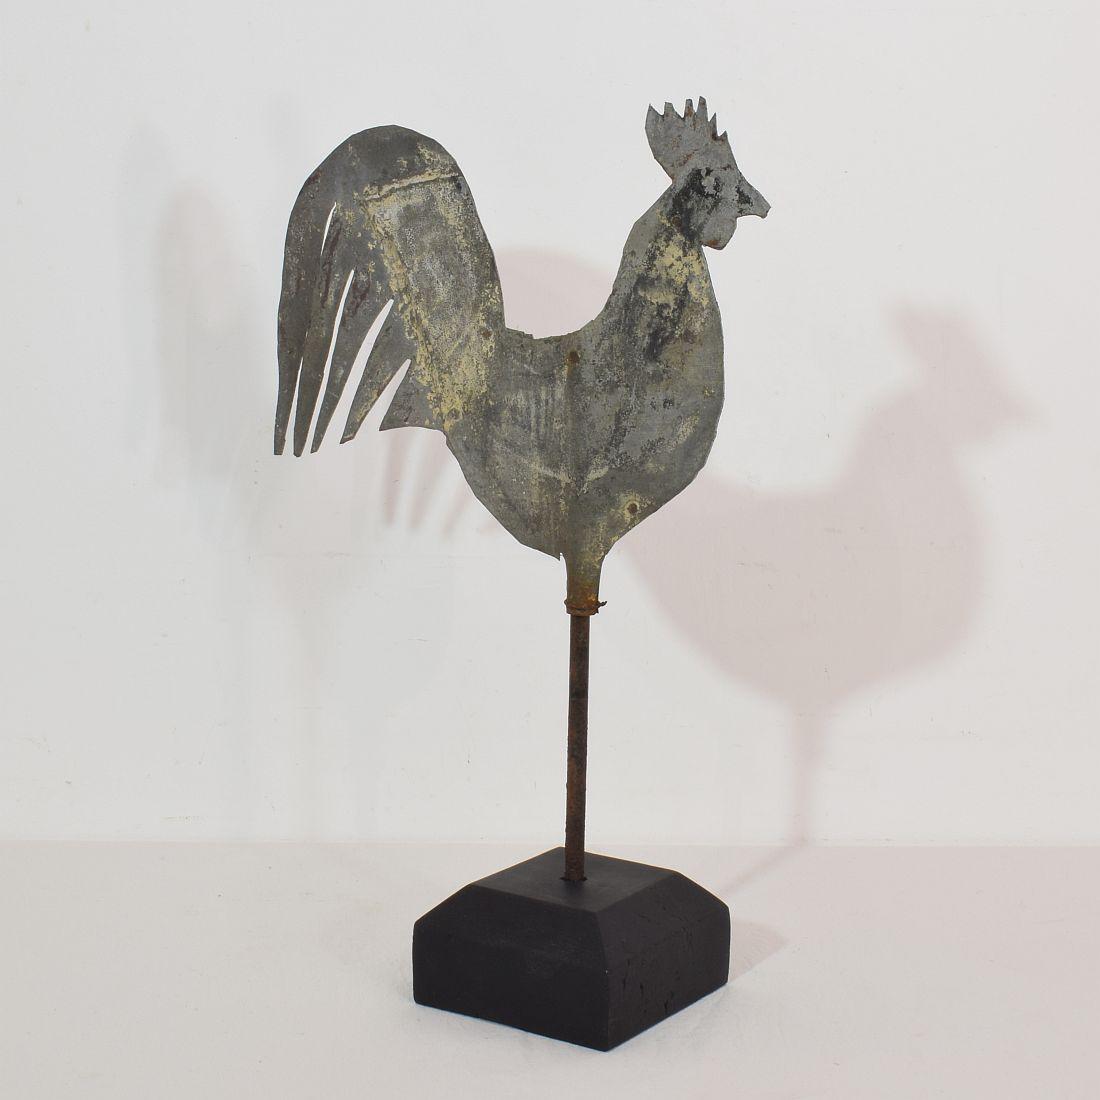 Beautiful and very rare zinc weathervane representing a rooster/cockerel. Traces of original color visible.
France, circa 1880-1900
Weathered.
Measurement here below includes the wooden base.